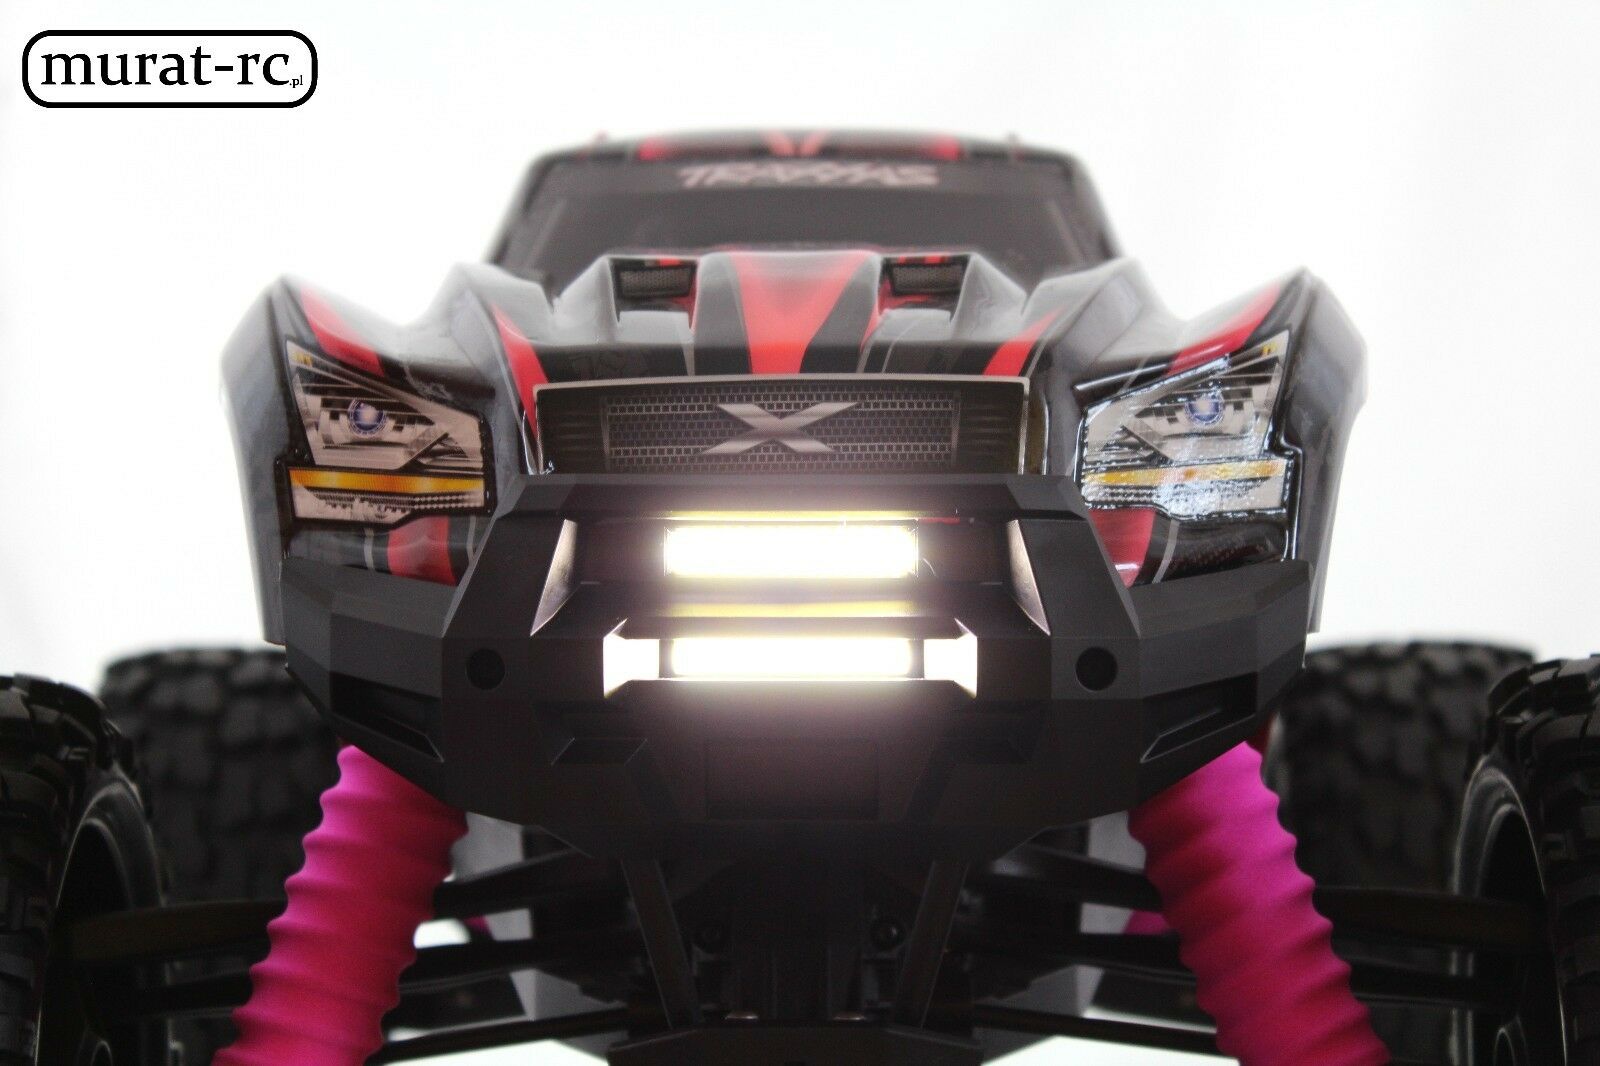 Front Double Led Light Bar For Traxxas X-maxx 6s 8s Waterproof By Murat-rc